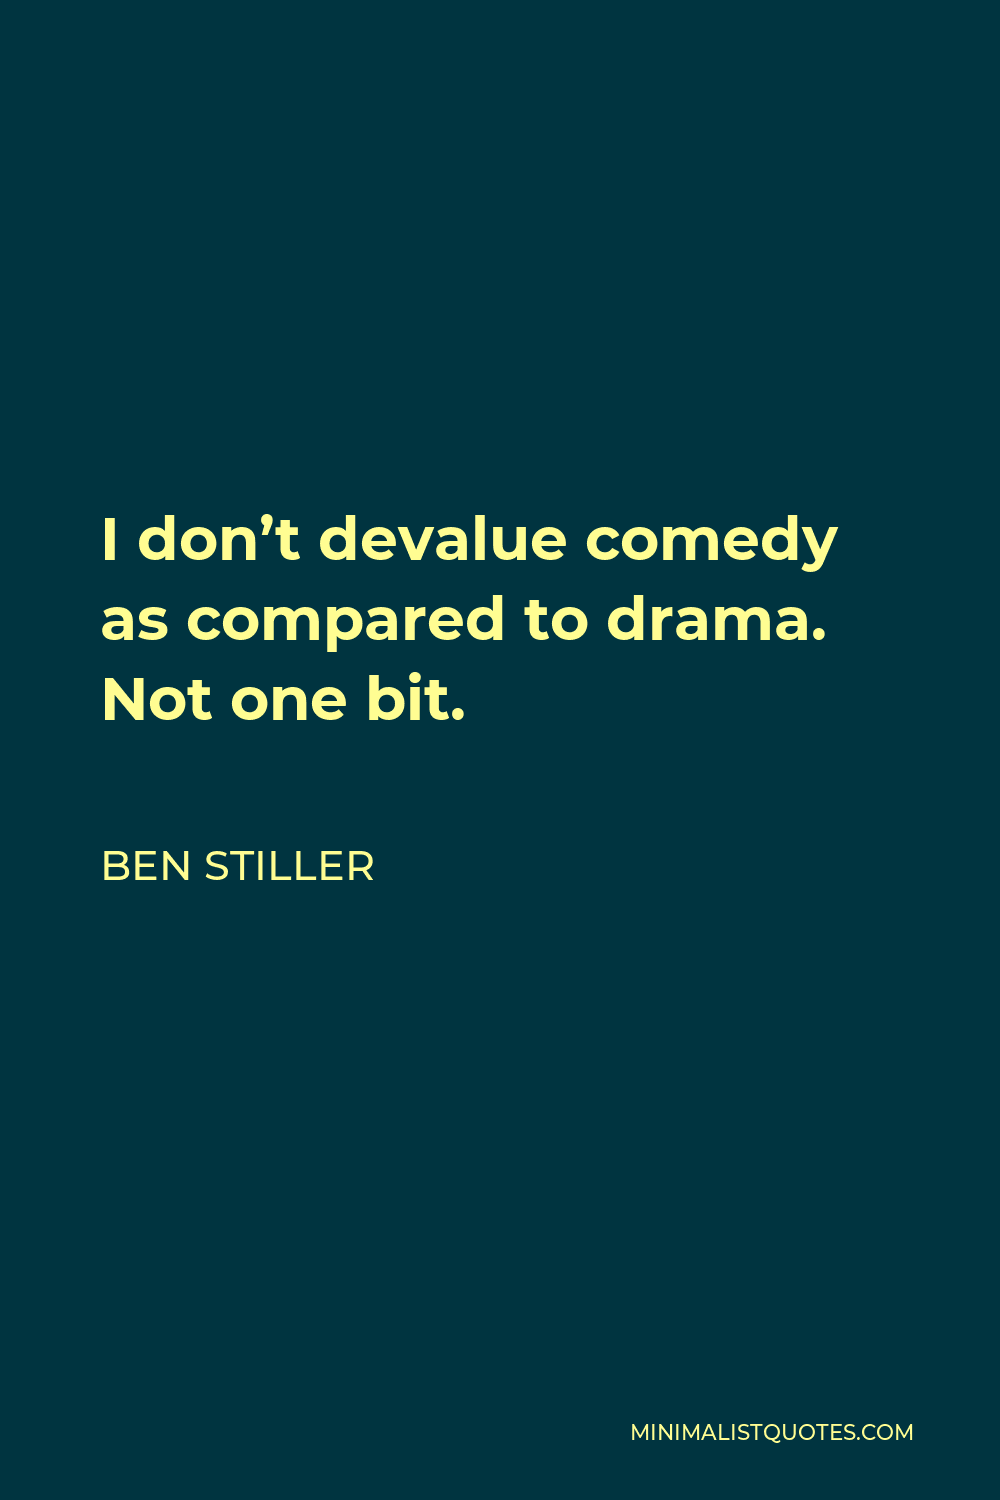 Ben Stiller Quote - I don’t devalue comedy as compared to drama. Not one bit.